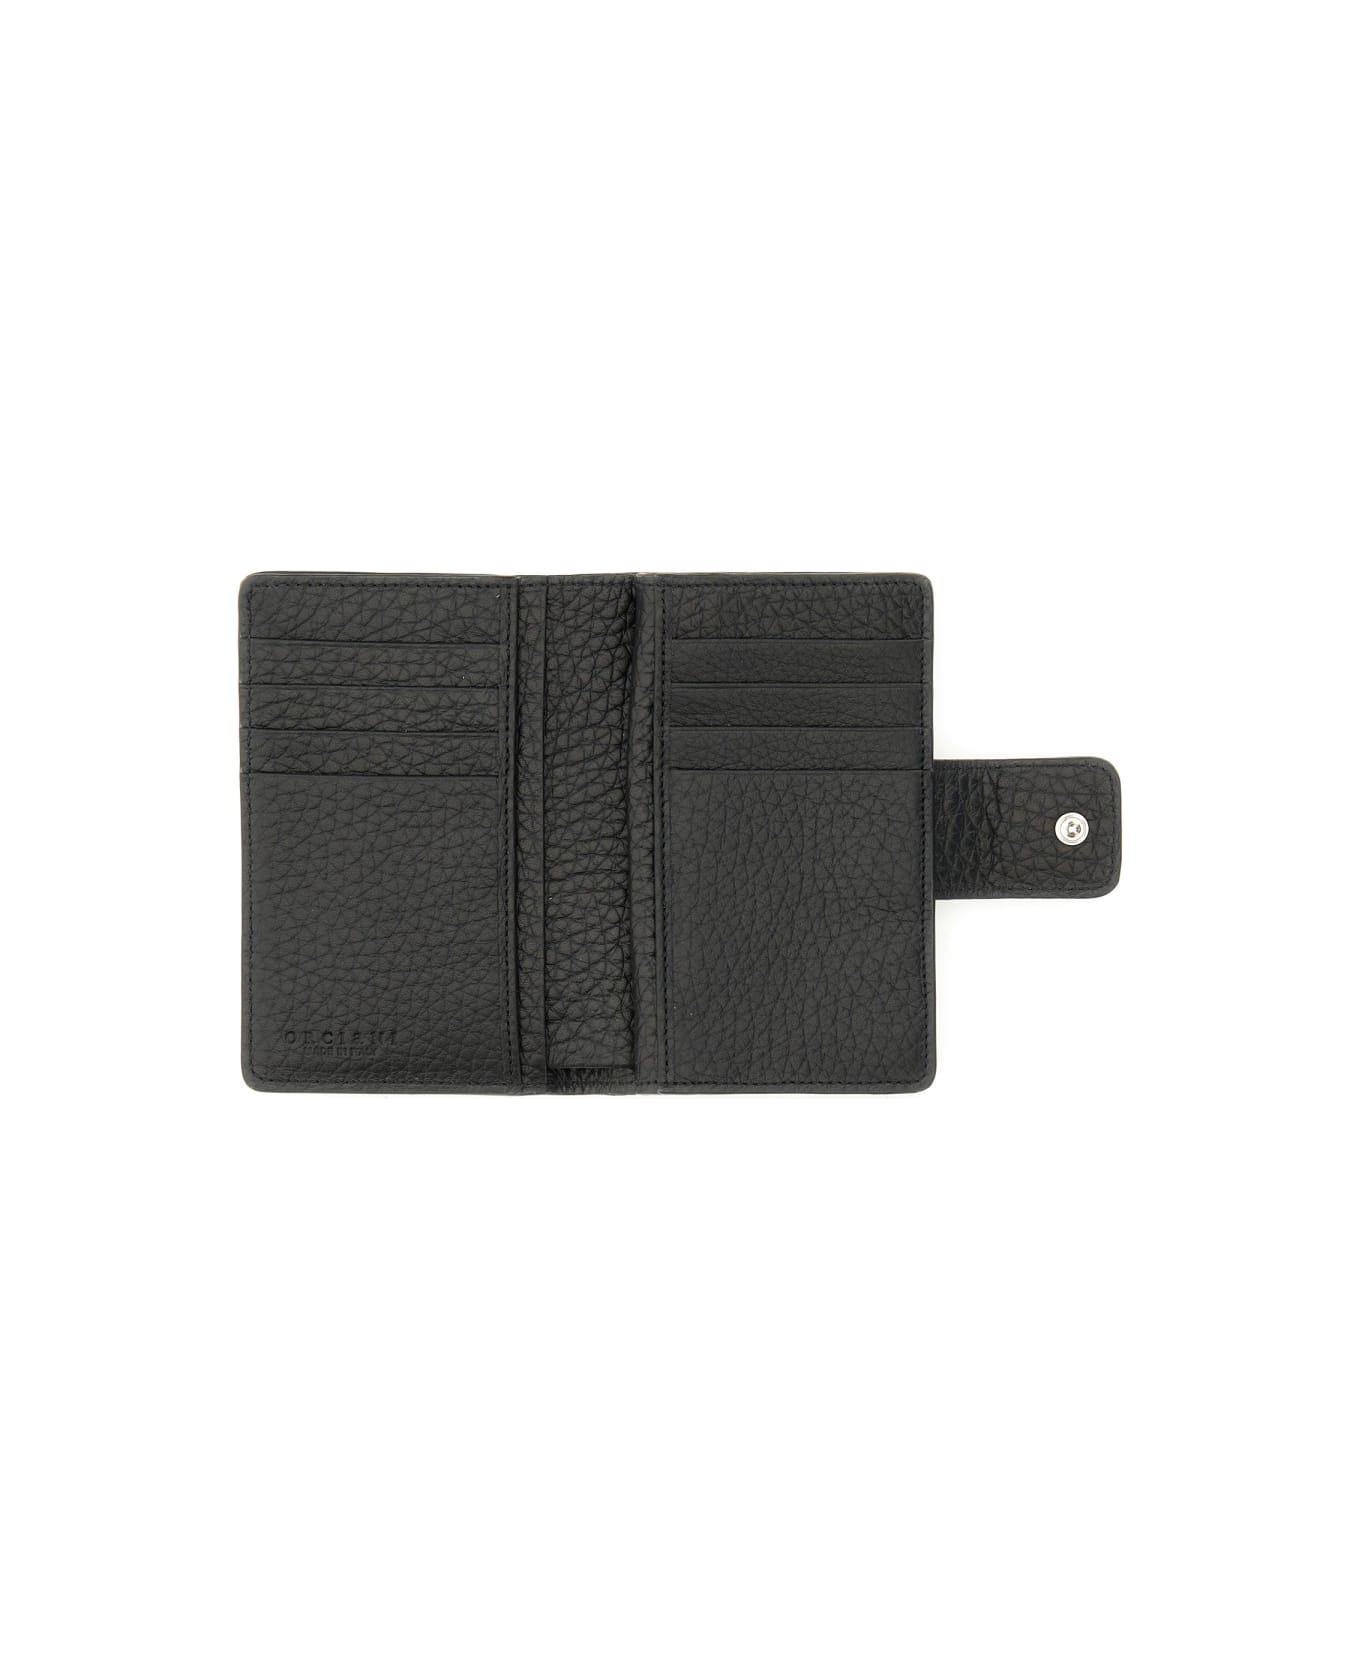 Orciani Leather Wallet - BLACK